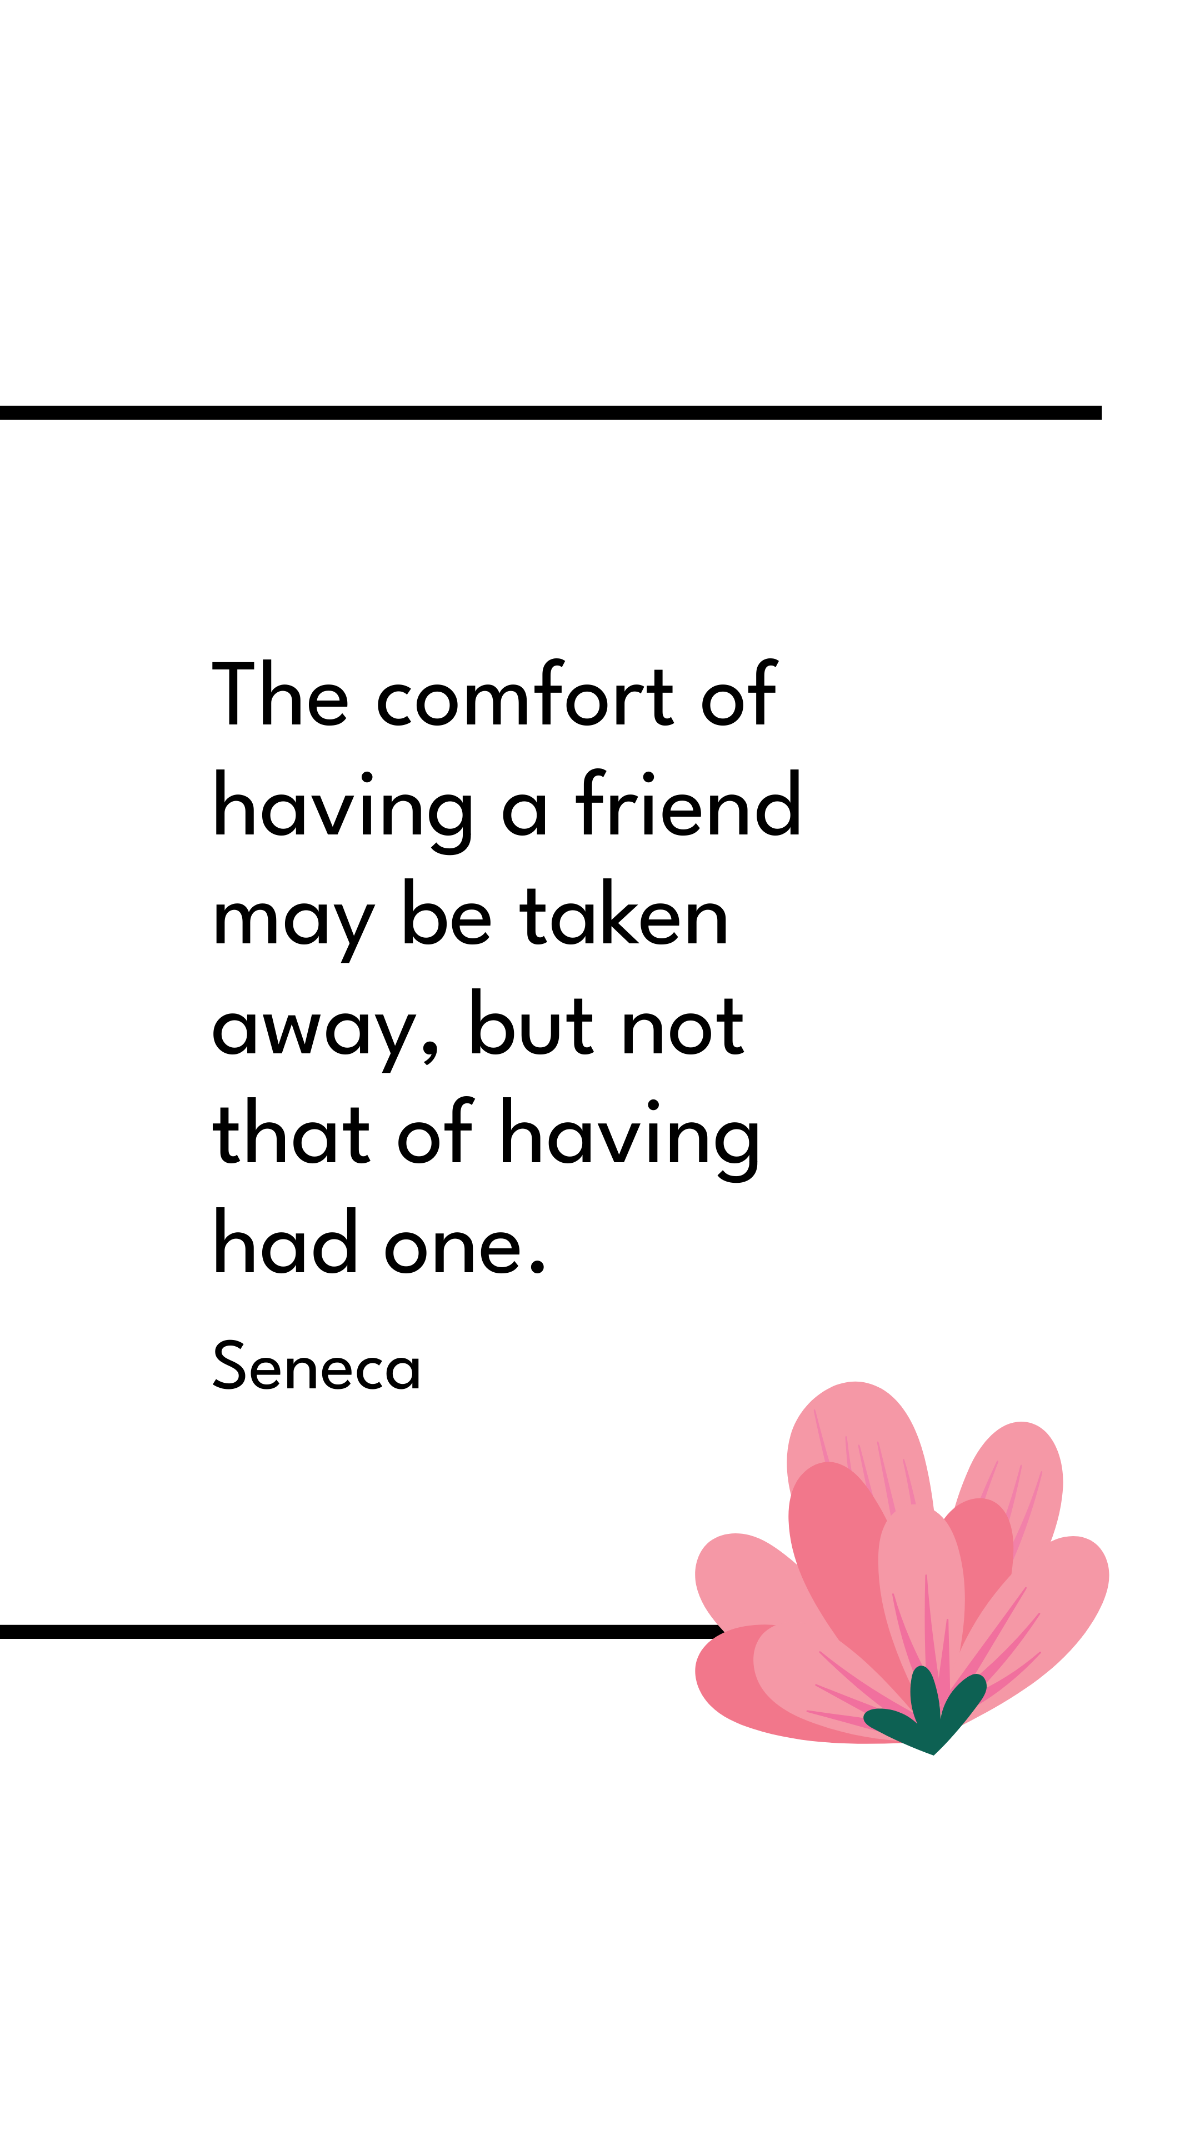 Free Seneca - The comfort of having a friend may be taken away, but not that of having had one. Template